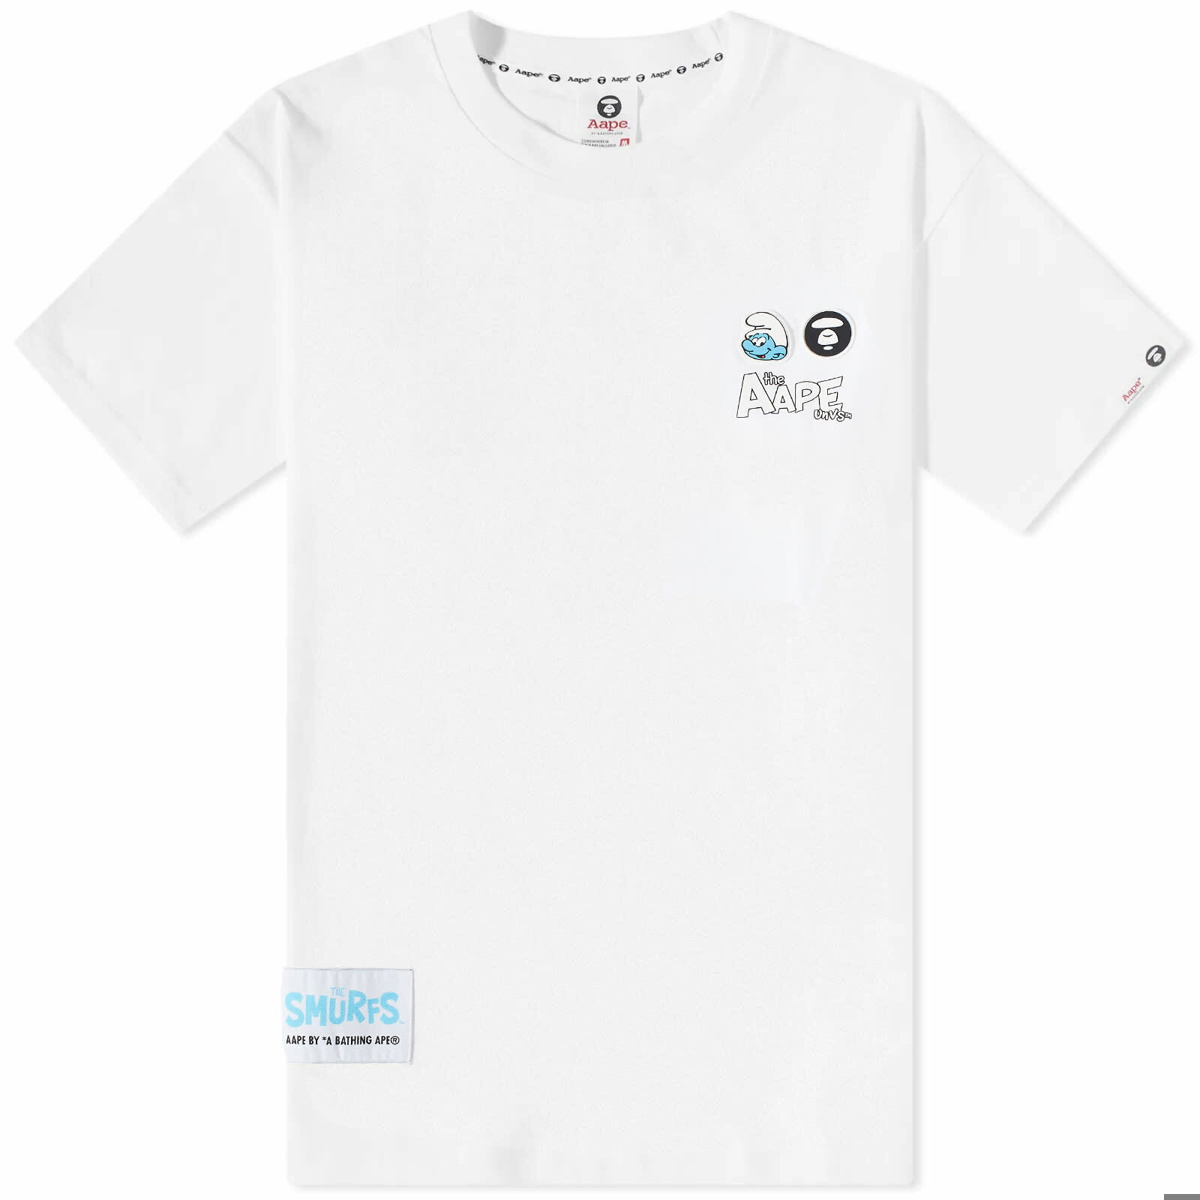 Men's AAPE x Smurfs Outline Smurf T-Shirt in White AAPE by A Bathing Ape